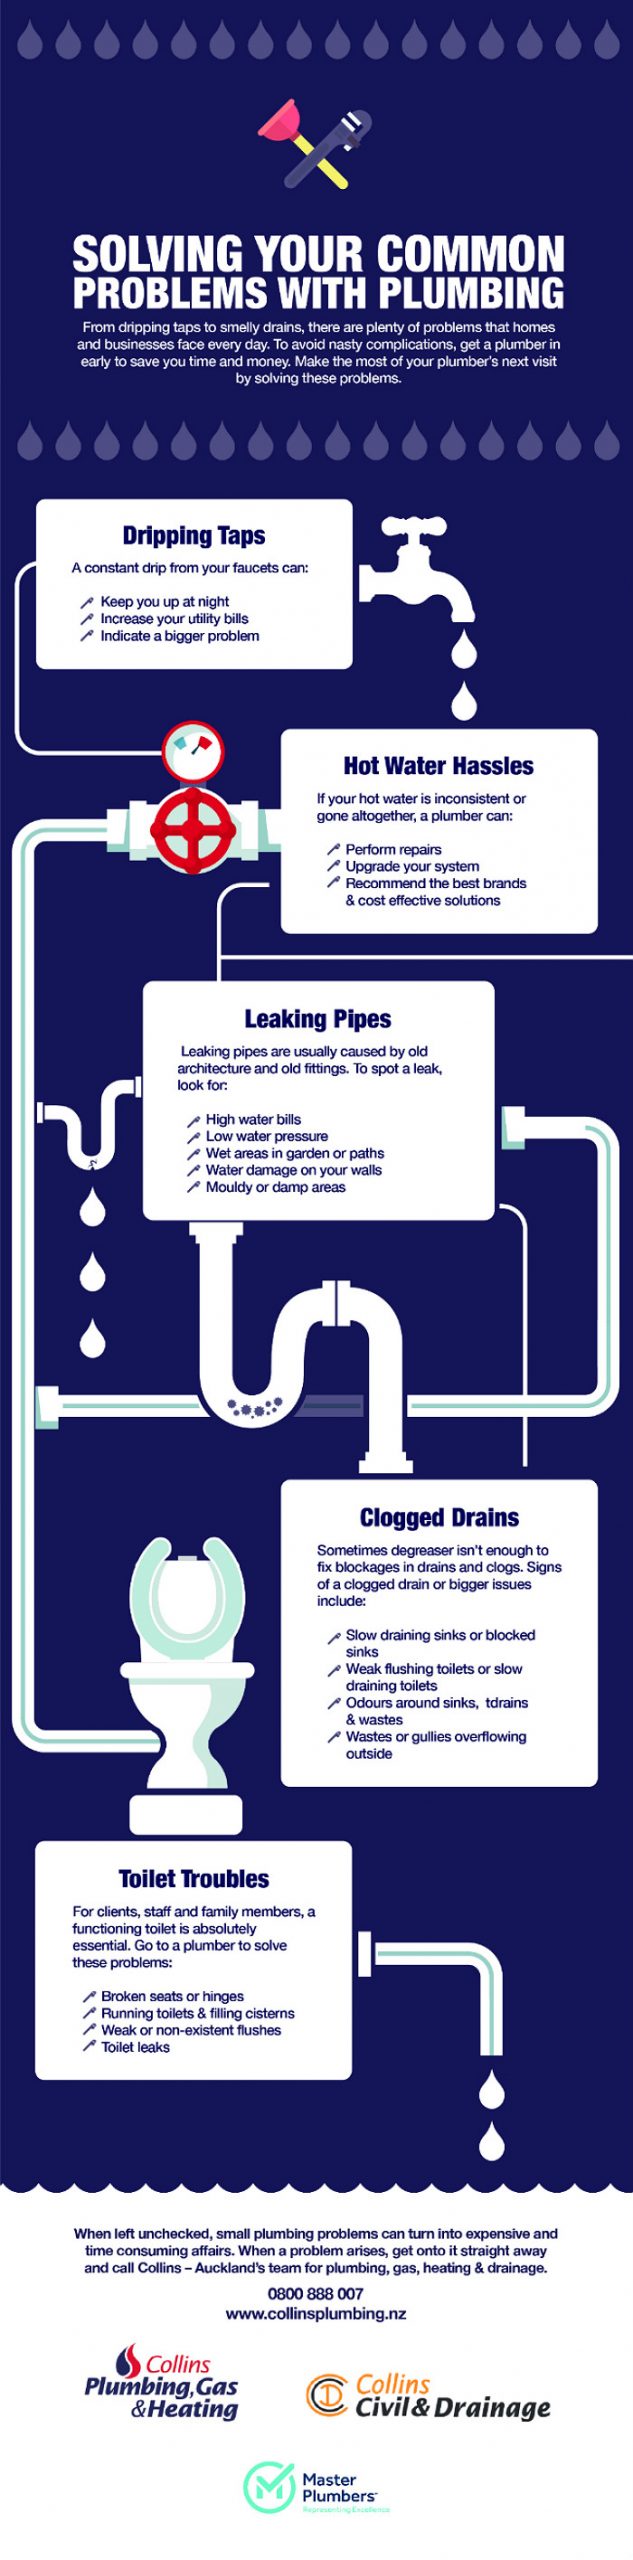 Solving Your Common Problems with Plumbing